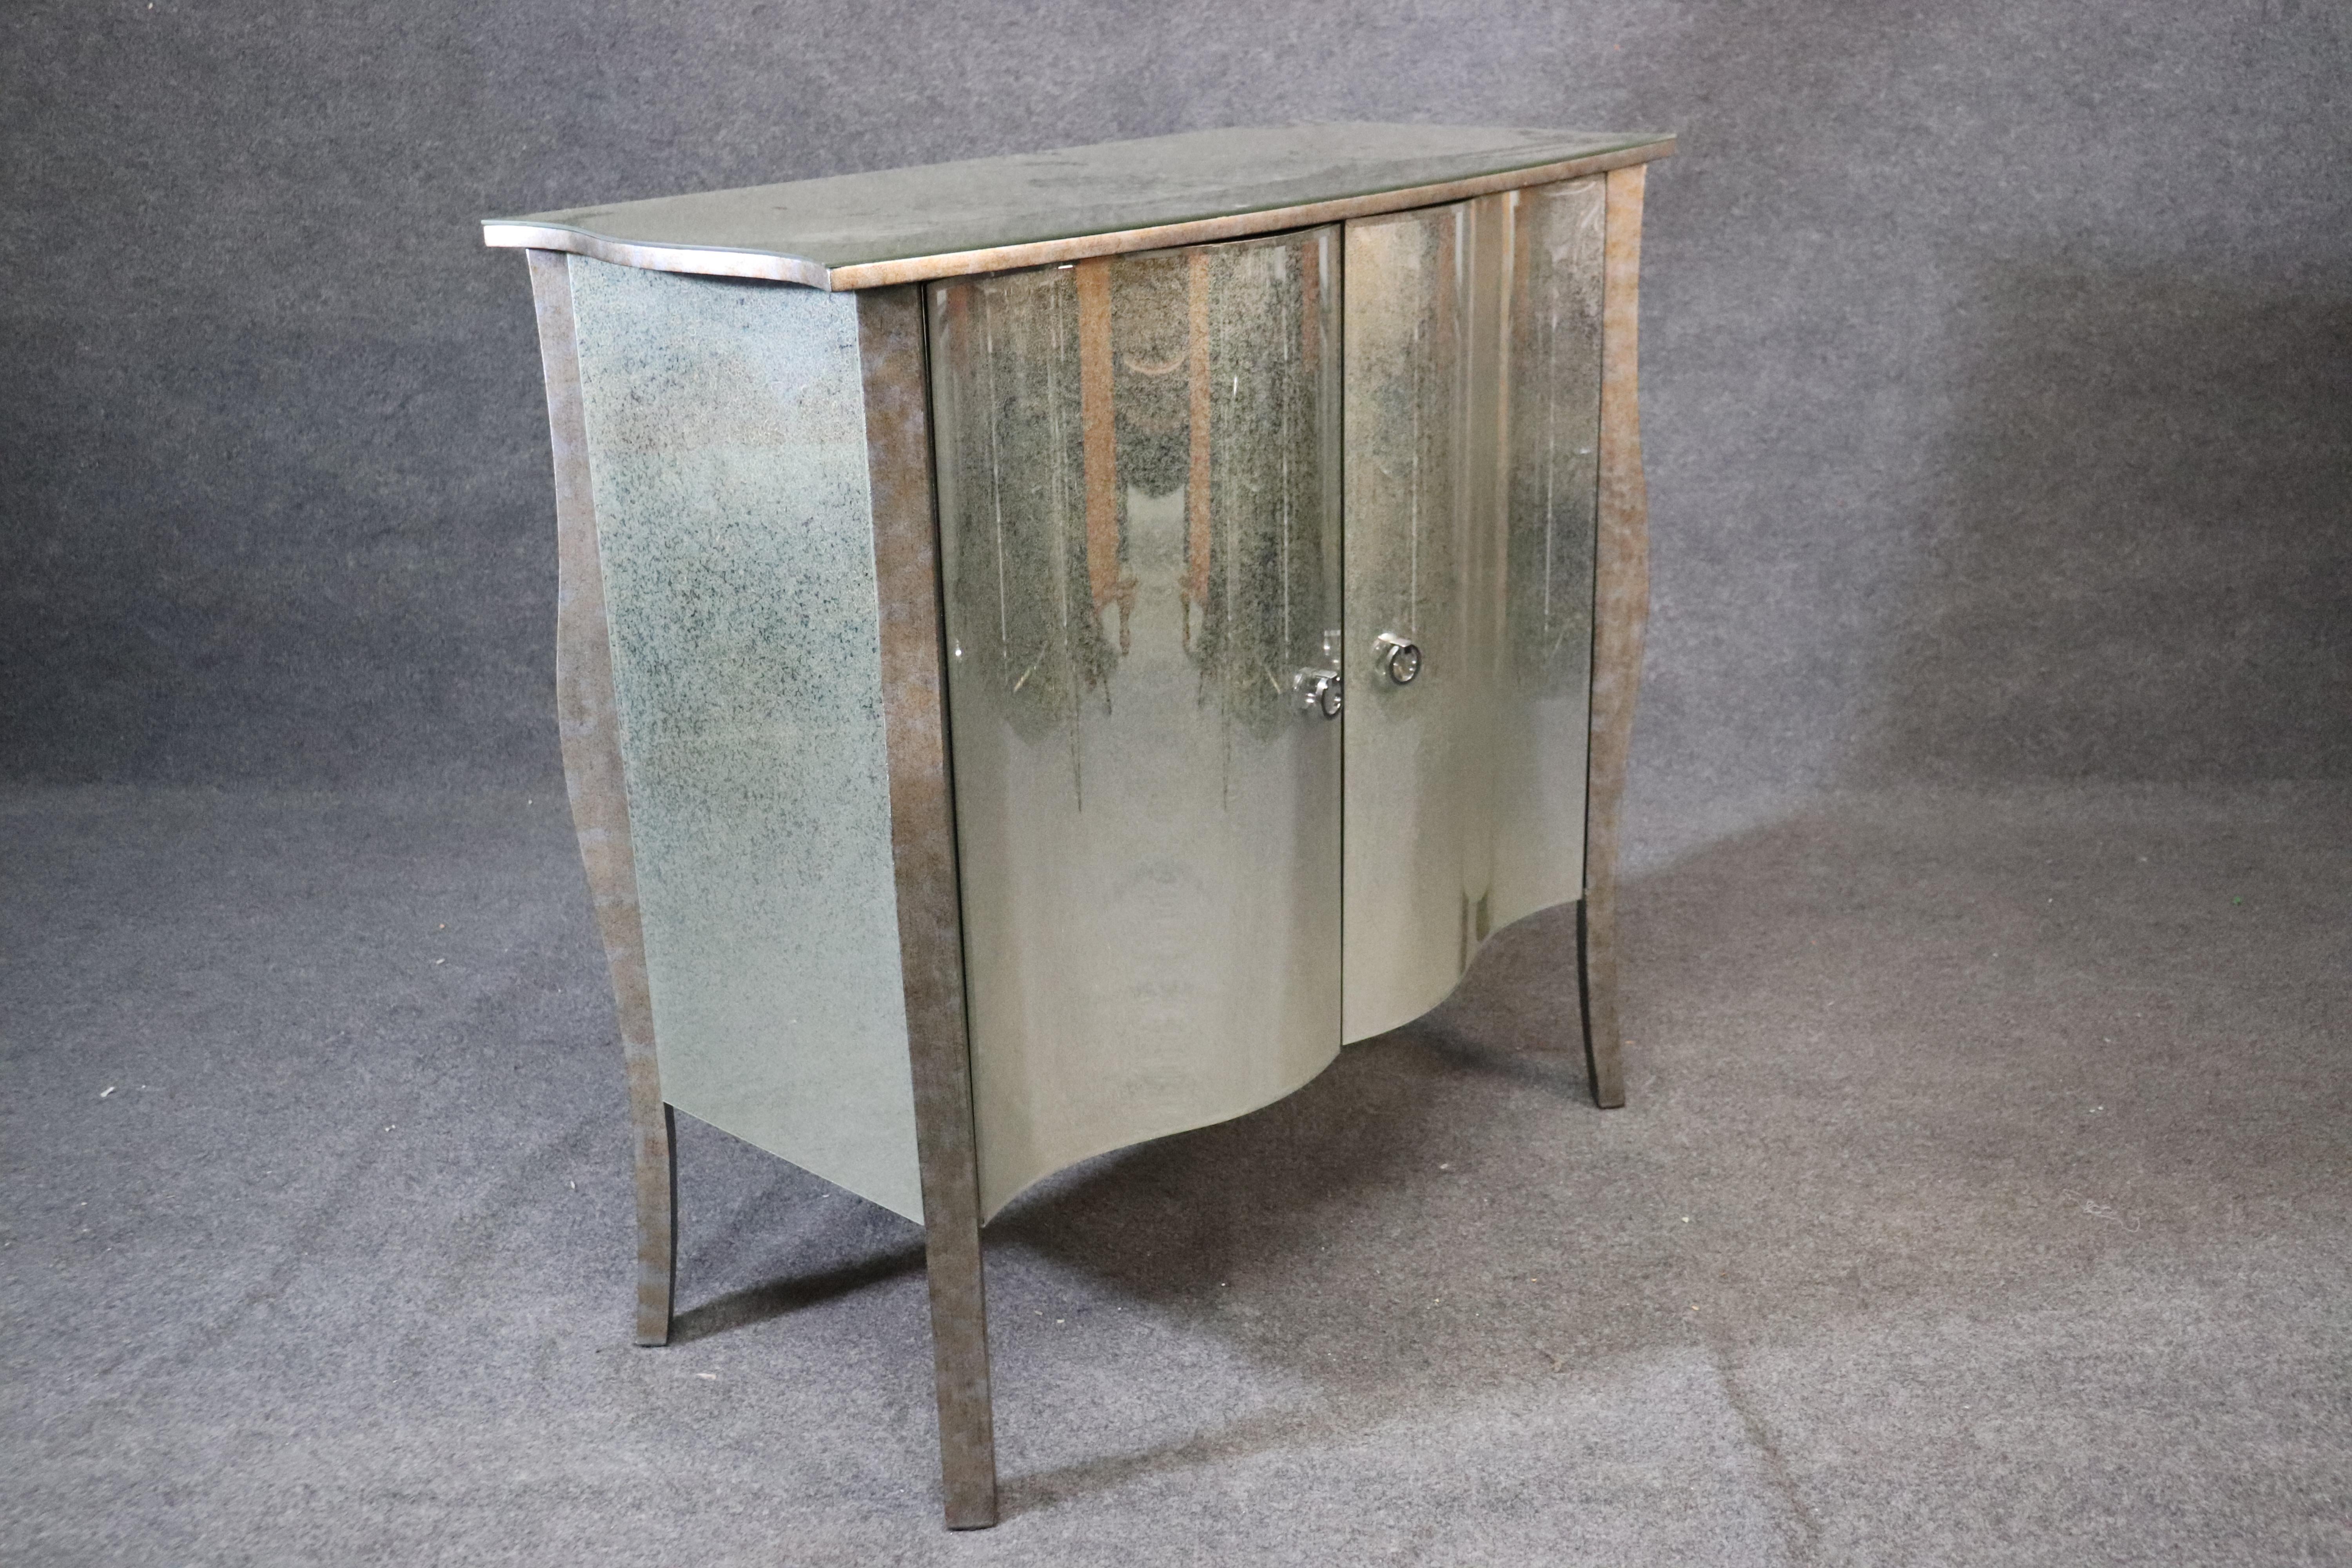 This is a gorgeous contemporary and nearly new patinate antiqued glass commode. The commode is done in the Art Deco style and is less than a year old. It has virtually no signs of wear and tear. The commode measures 38 inches tall x 40 wide x 18